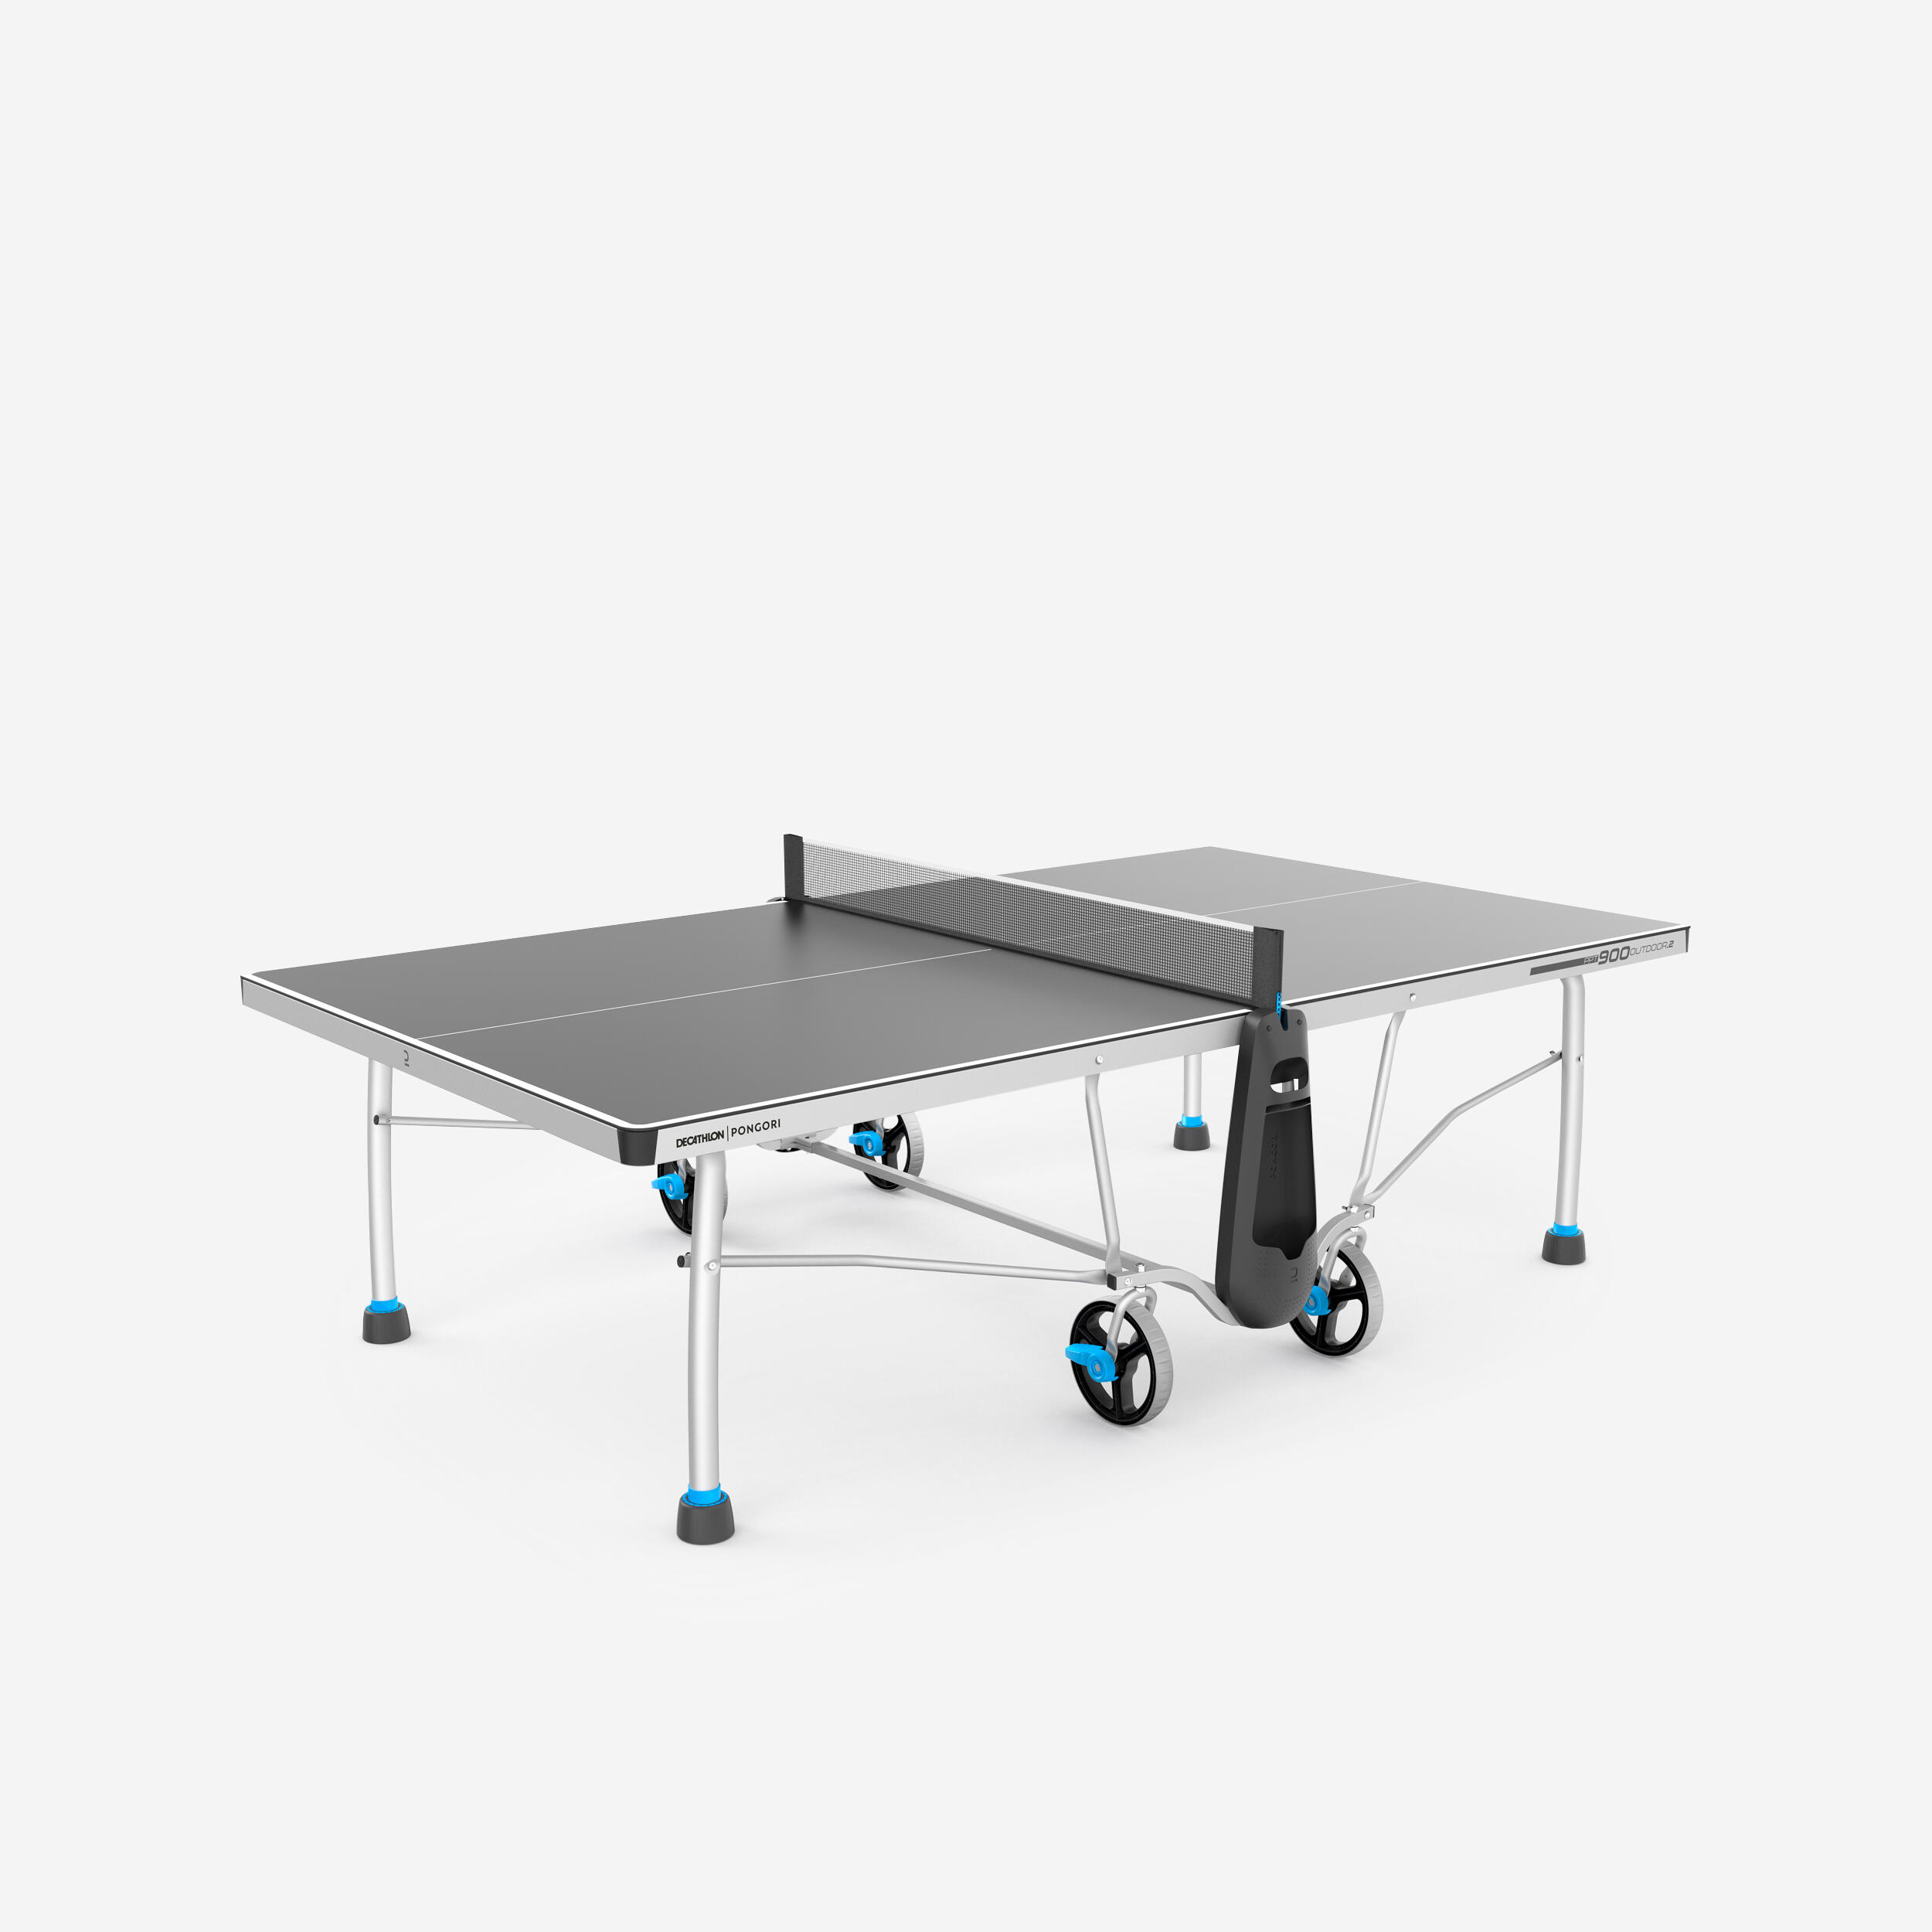 Outdoor Table Tennis Table PPT 900.2 - Grey 1/15